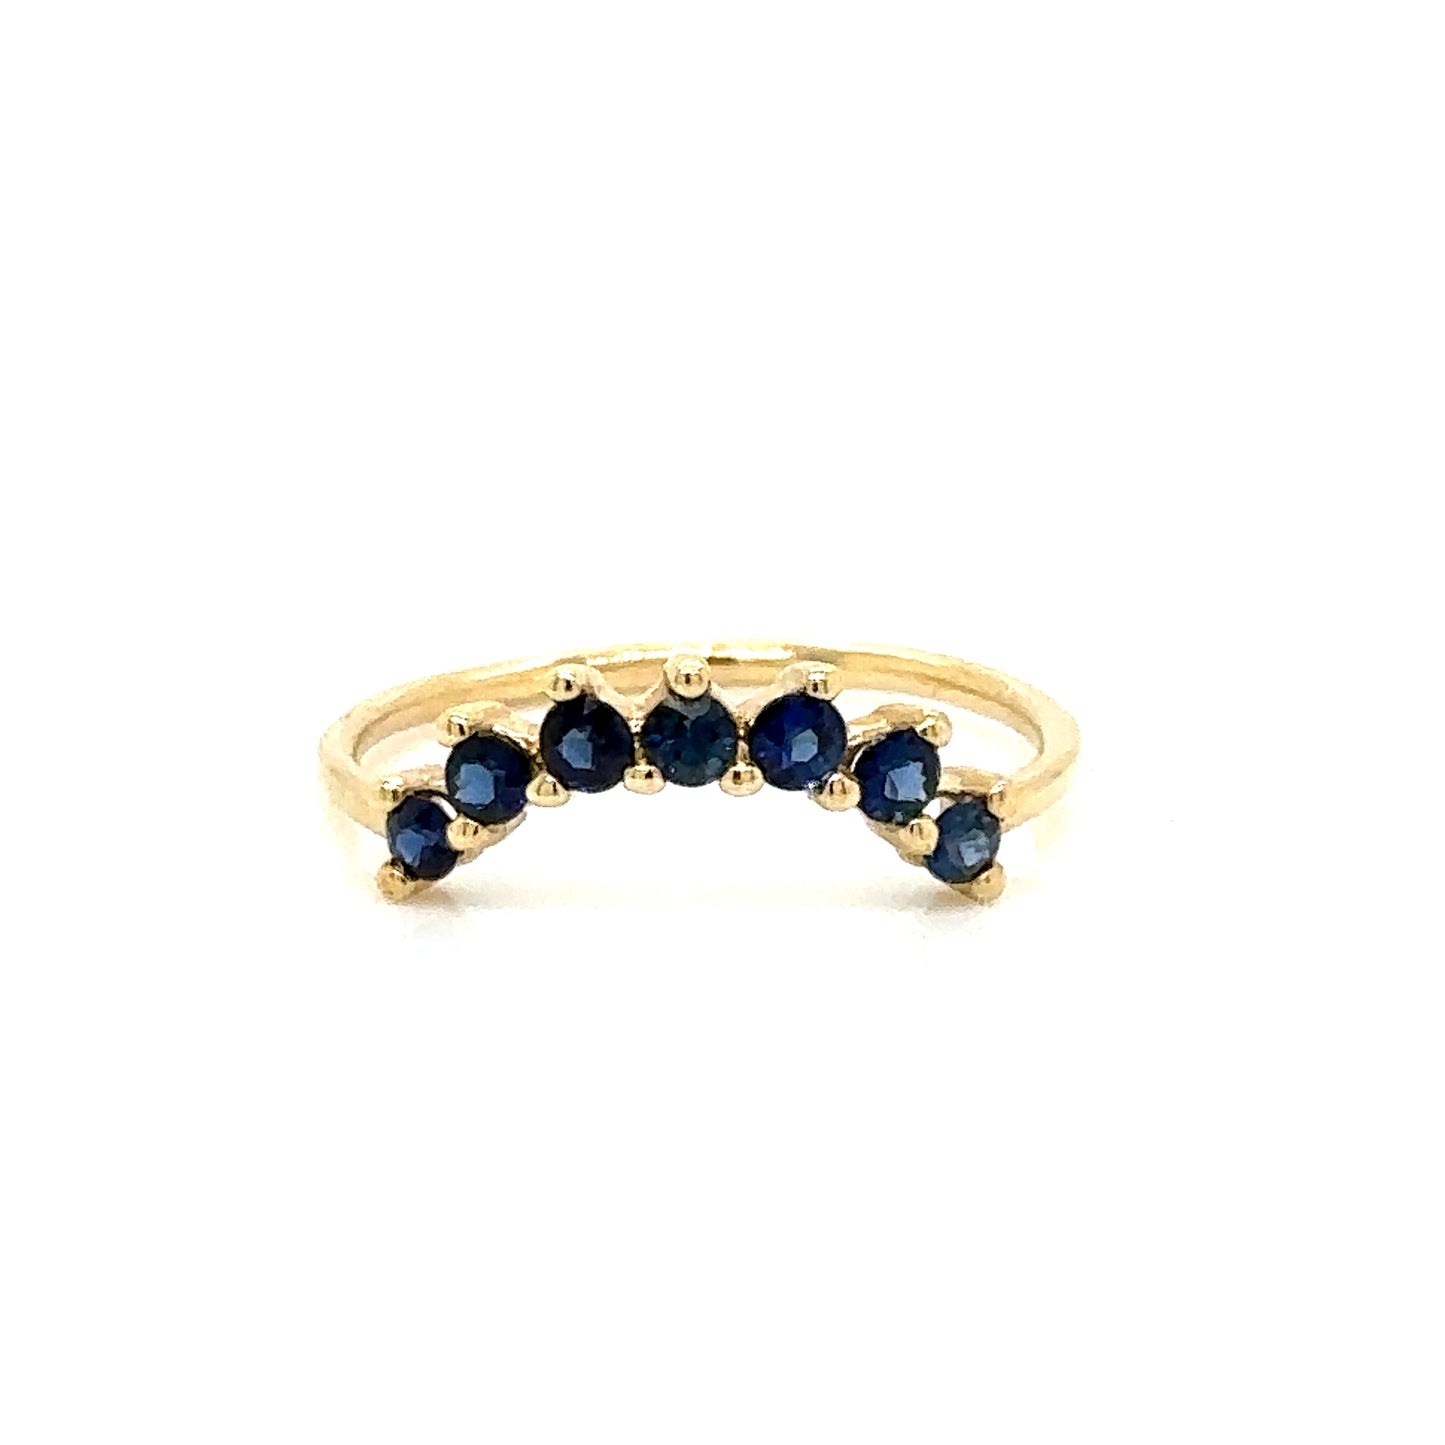 IMMEDIATE DELIVERY / Mijal Sapphire Crown / 14k Yellow Gold / Size 4.5